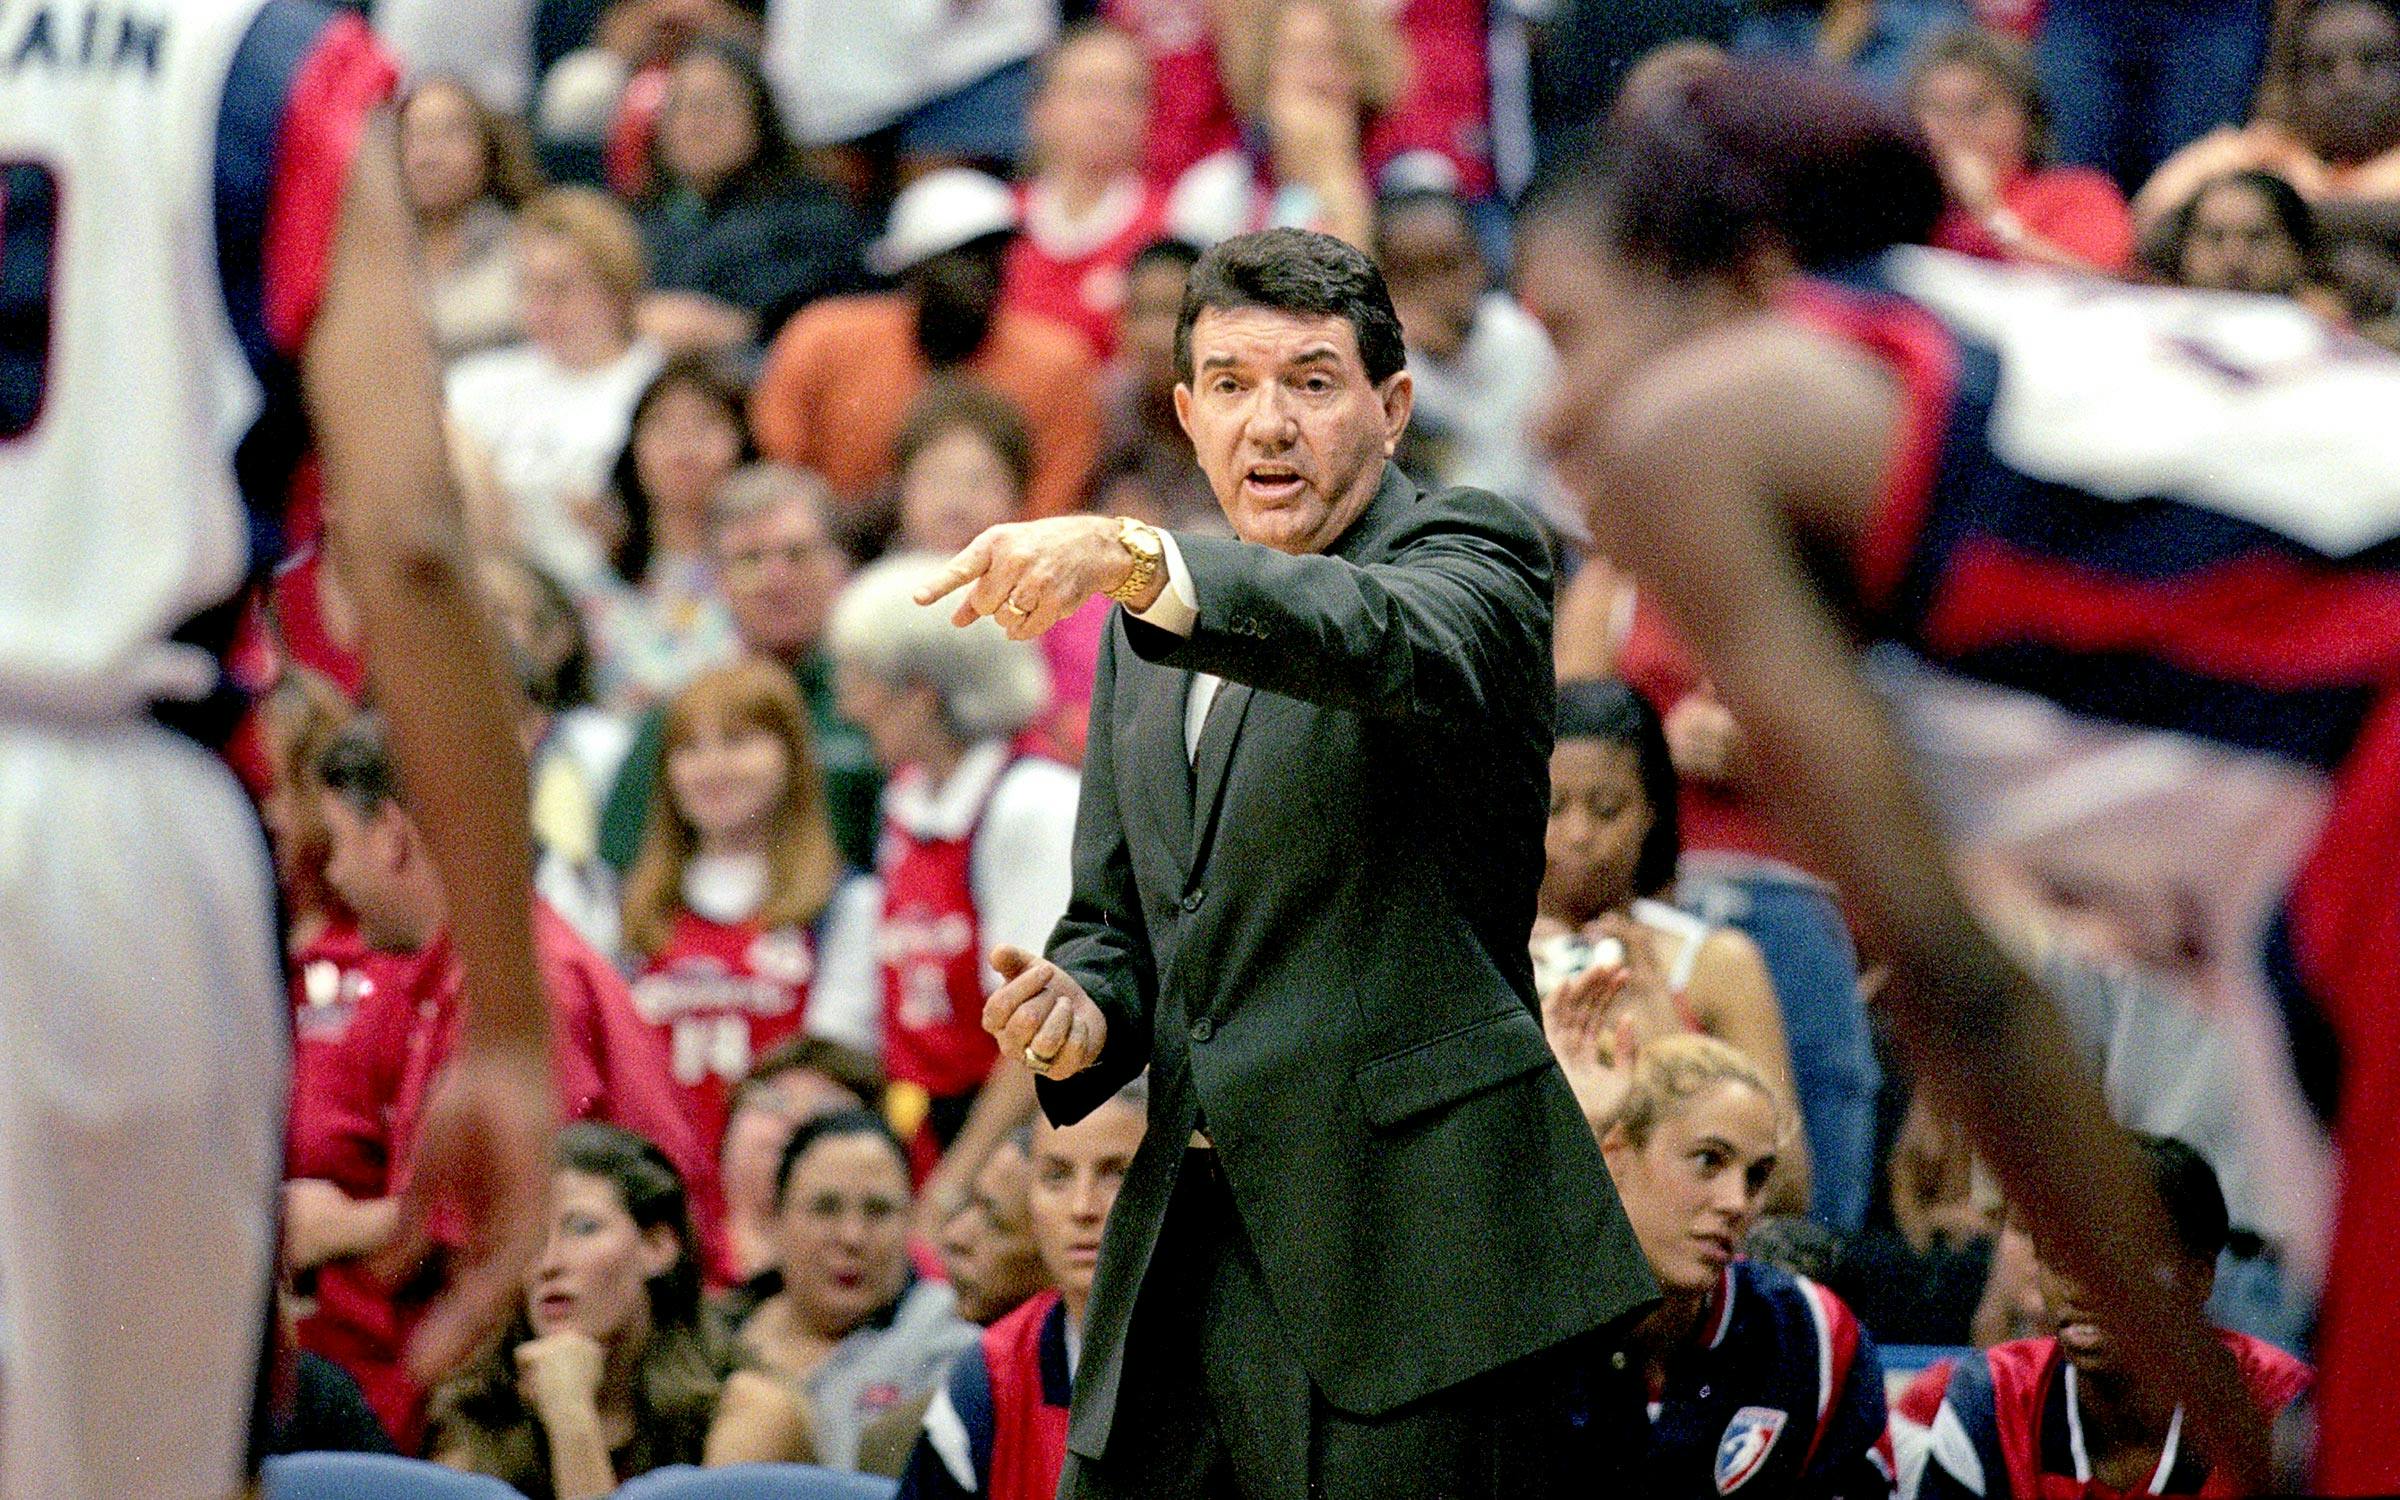 In the WNBA's Early Days, Houston's Comets Came Around Every Year